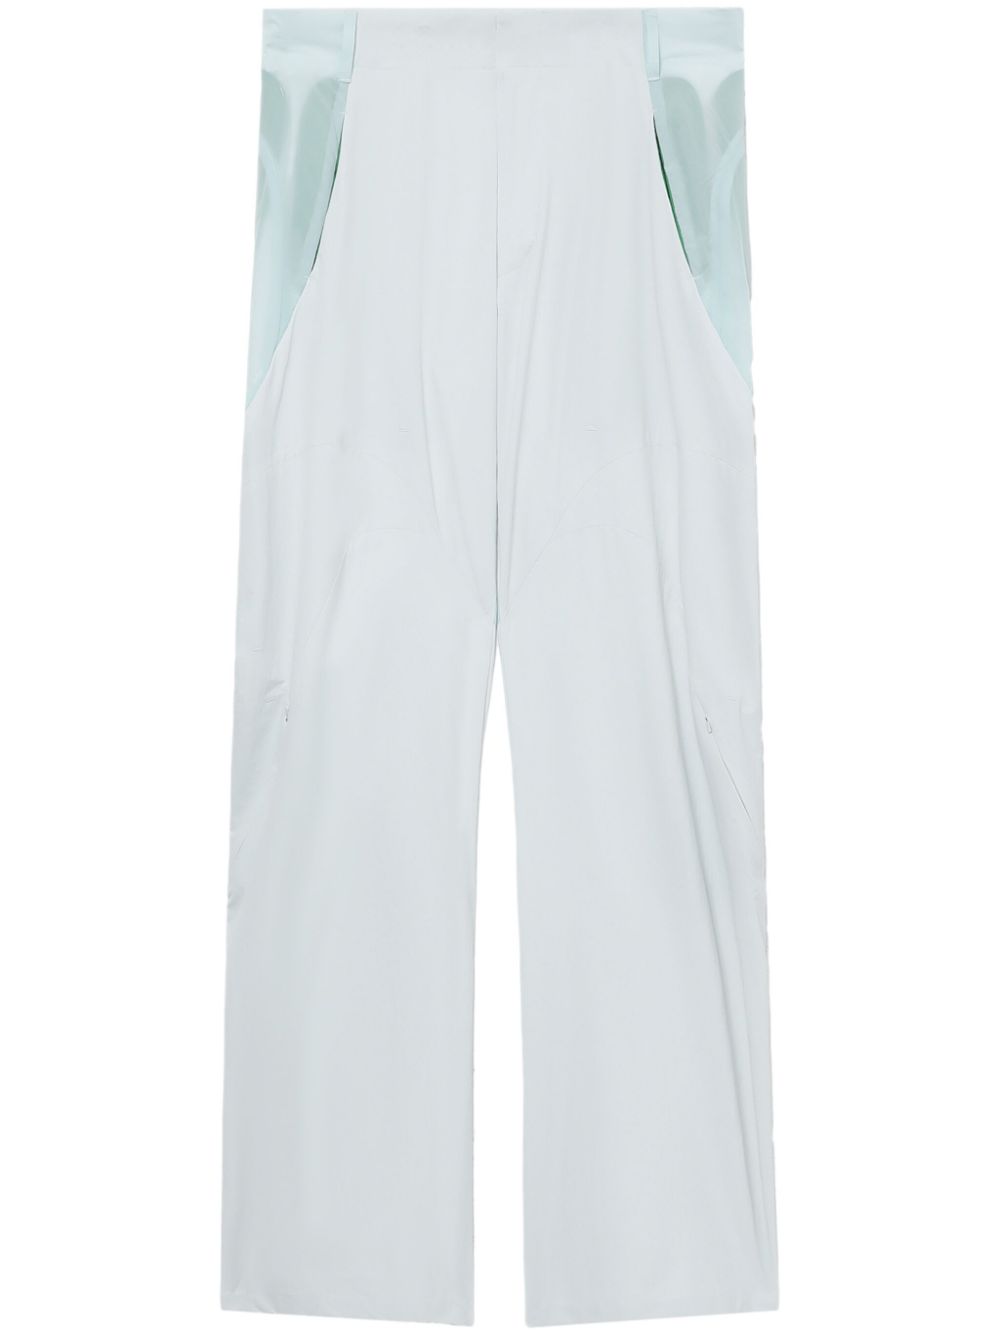 Post Archive Faction layered straight leg trousers - Blu